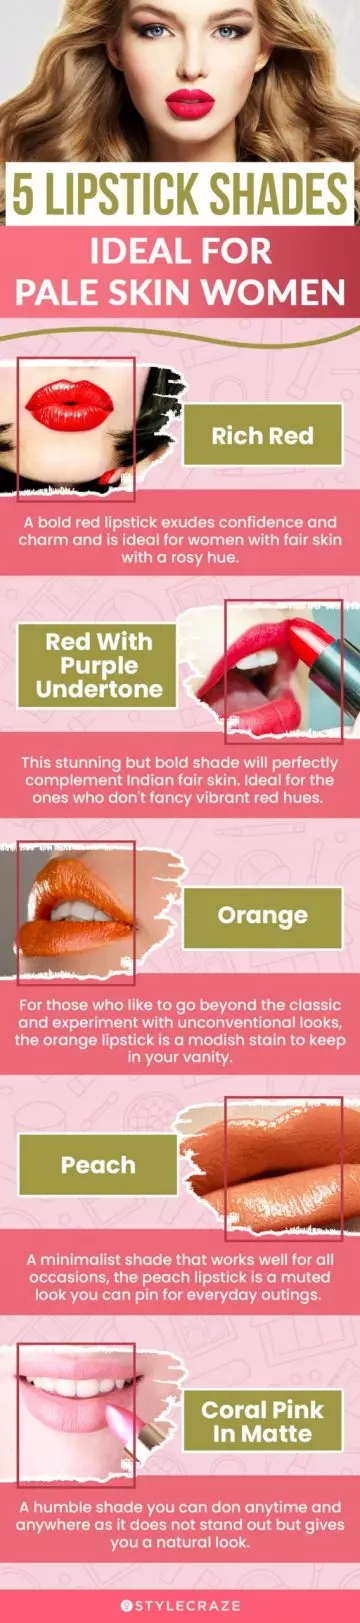 5 lipstick shades ideal for pale skin women (infographic)